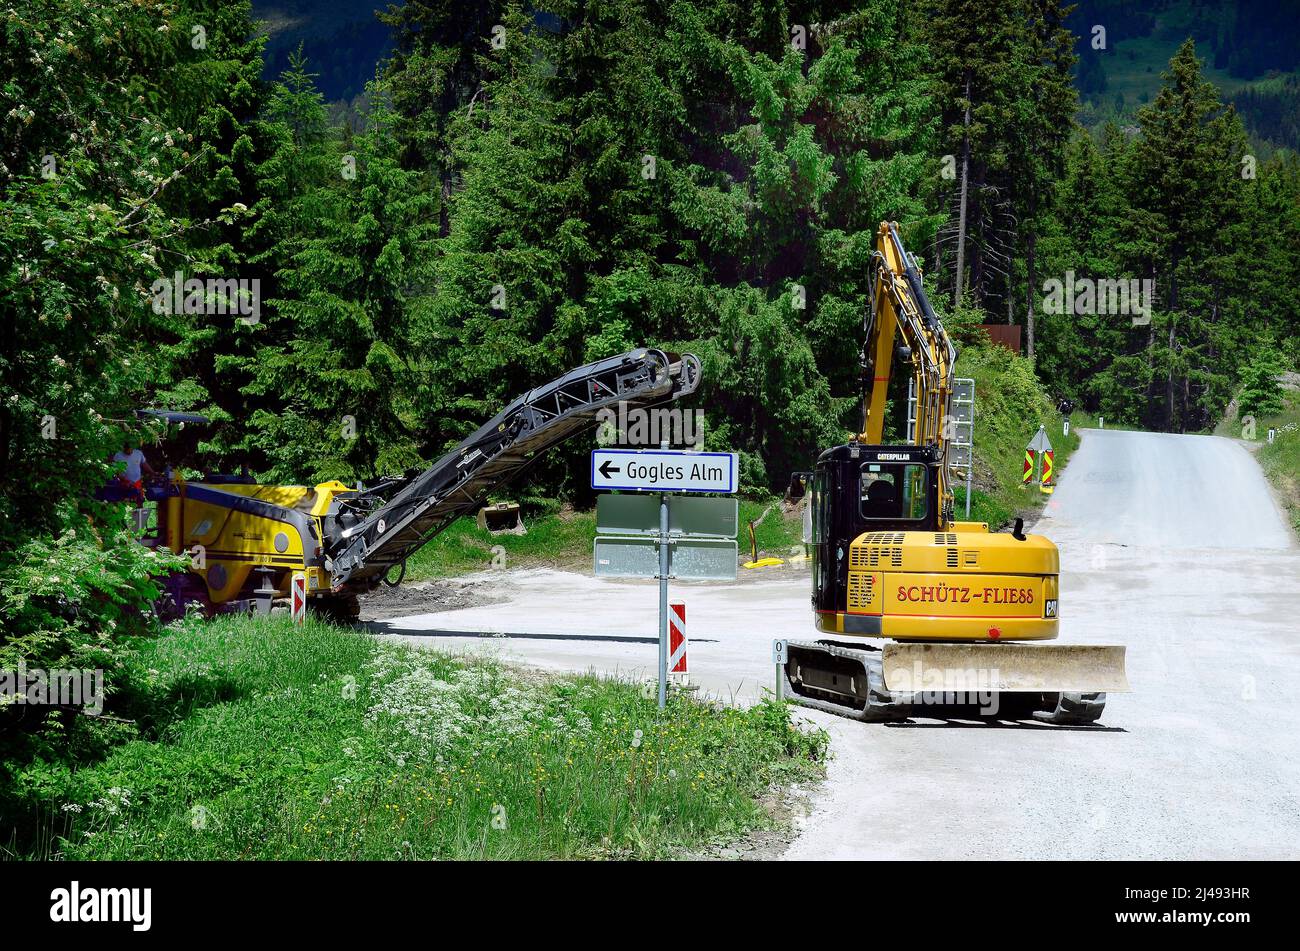 Piller, Austria - June 22, 2016: Unidentified worker on milling machine and mechanical digger for road construction Stock Photo